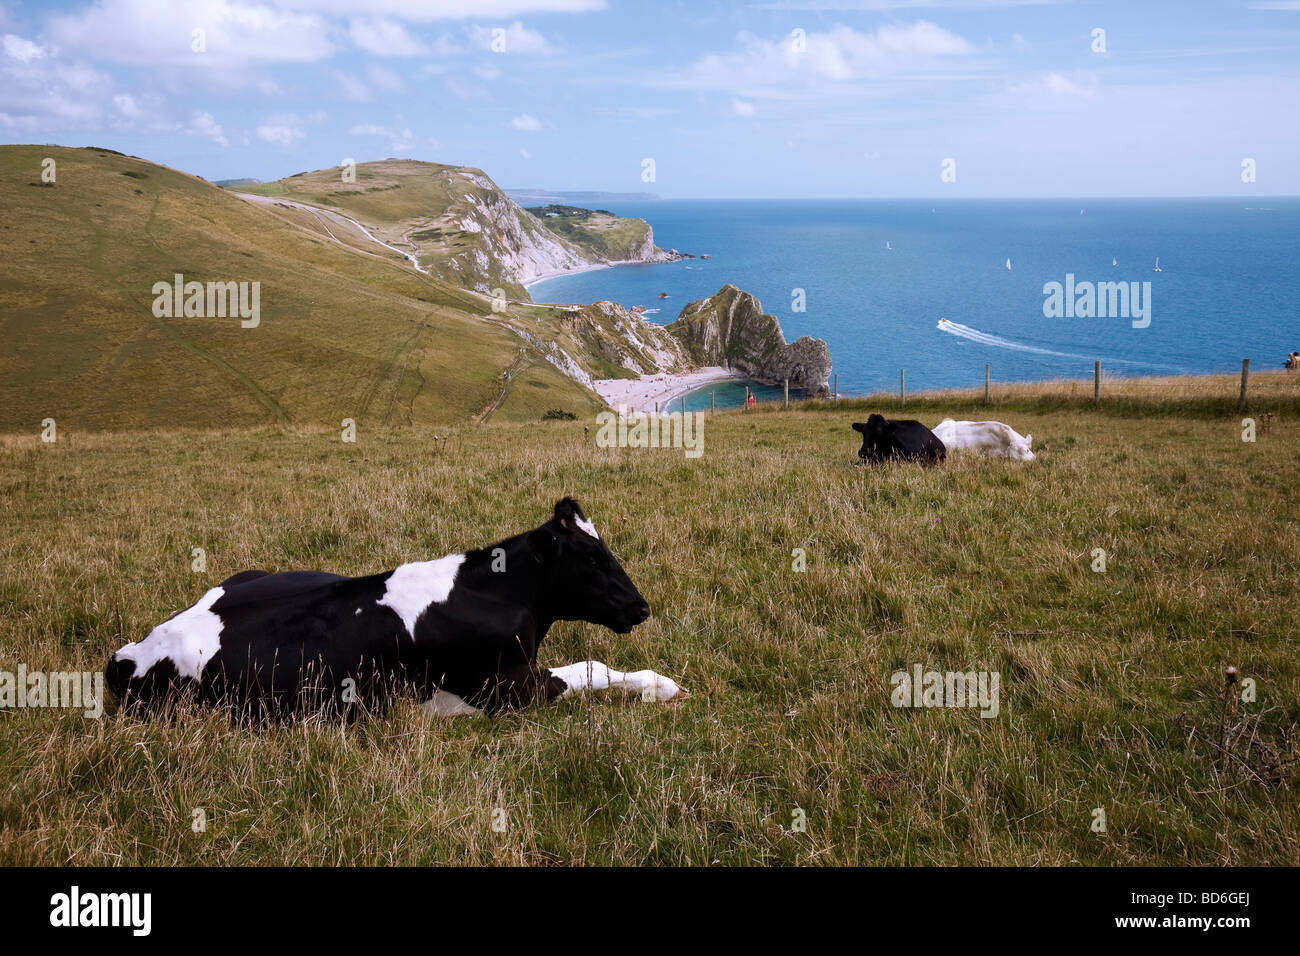 Landscape of cows sitting in field overlooking Durdle Dor and Man of War Bay, sea, sand, Jurassic Coastline. Stock Photo